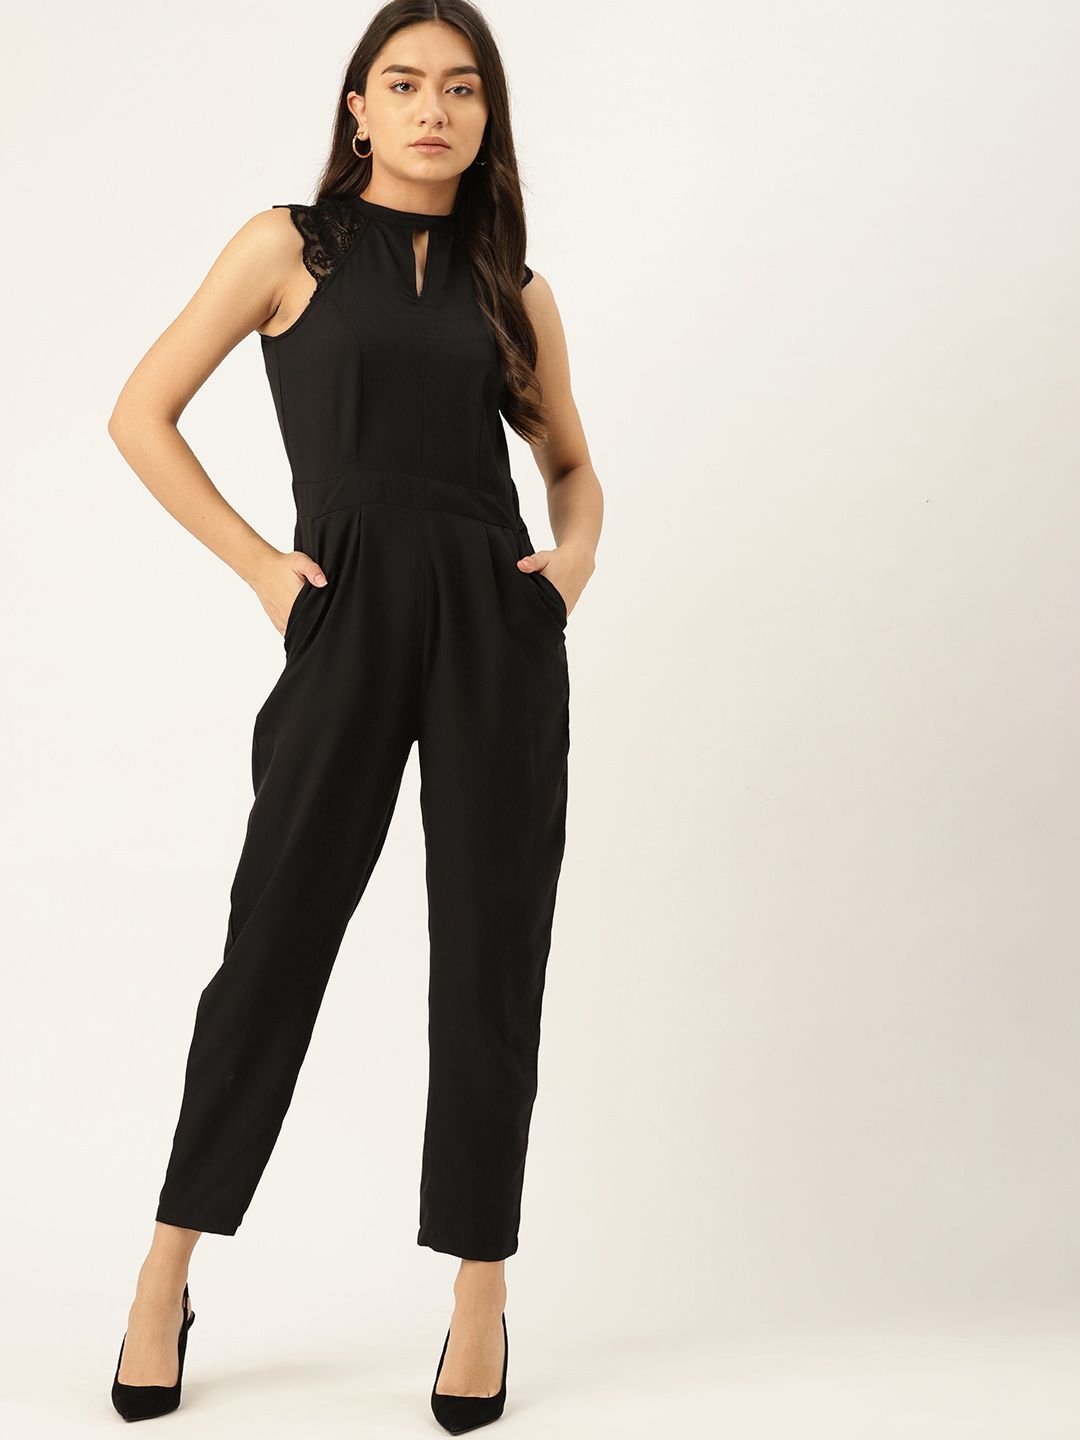 DressBerry Black Solid Halter Neck Basic Jumpsuit with Lace Inserts Price in India